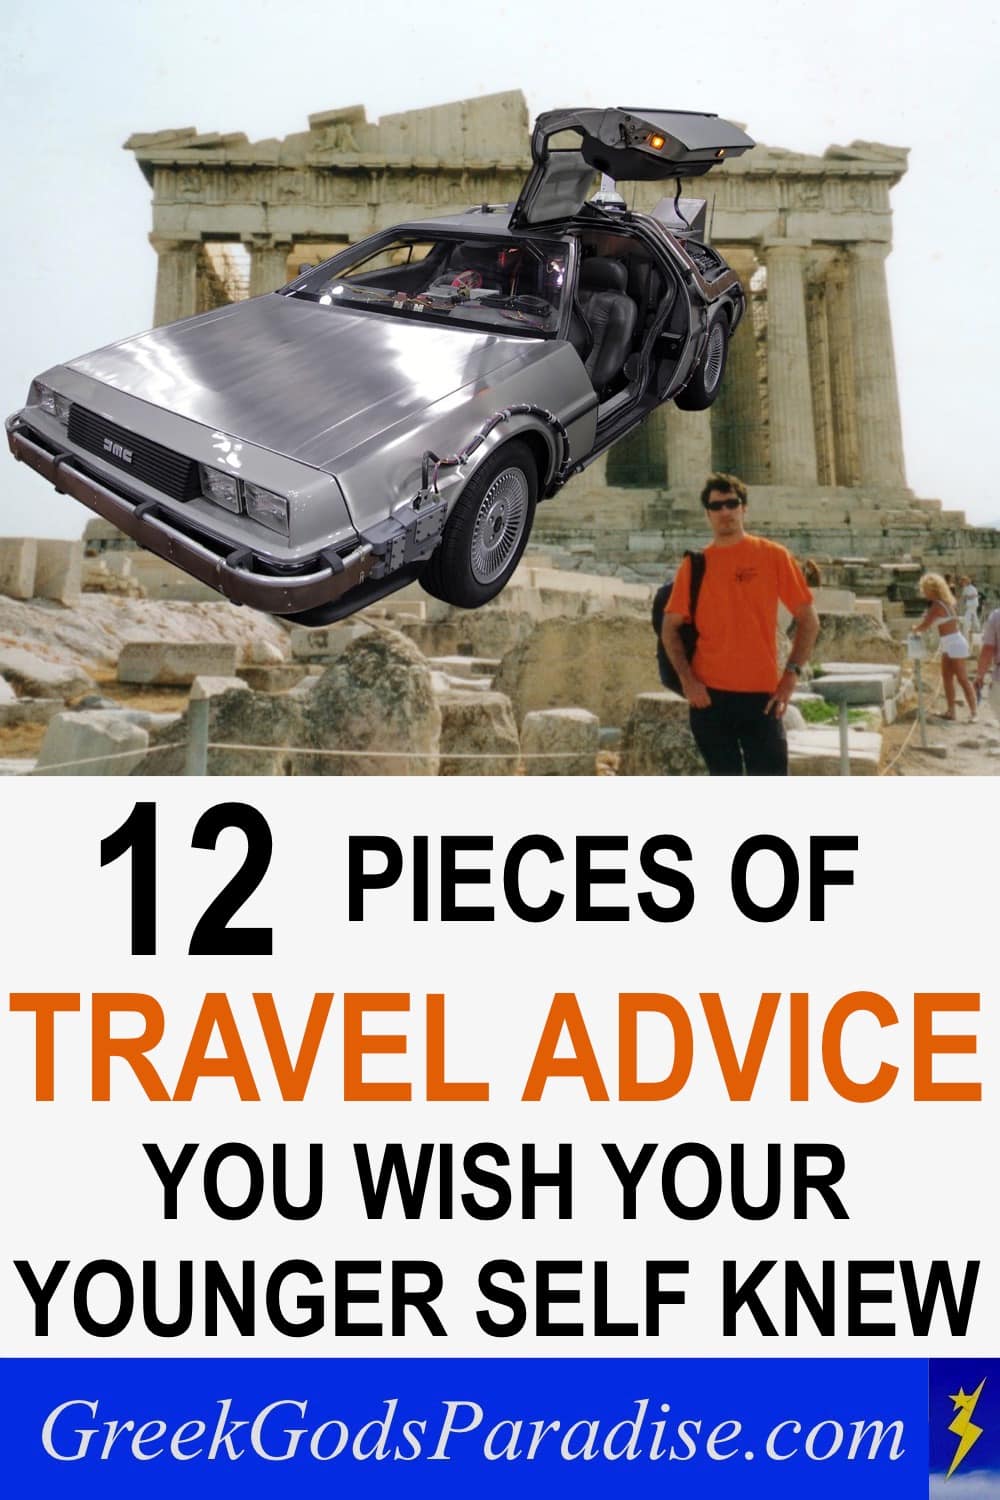 12 Pieces of Travel Advice You Wish Your Younger Self Knew